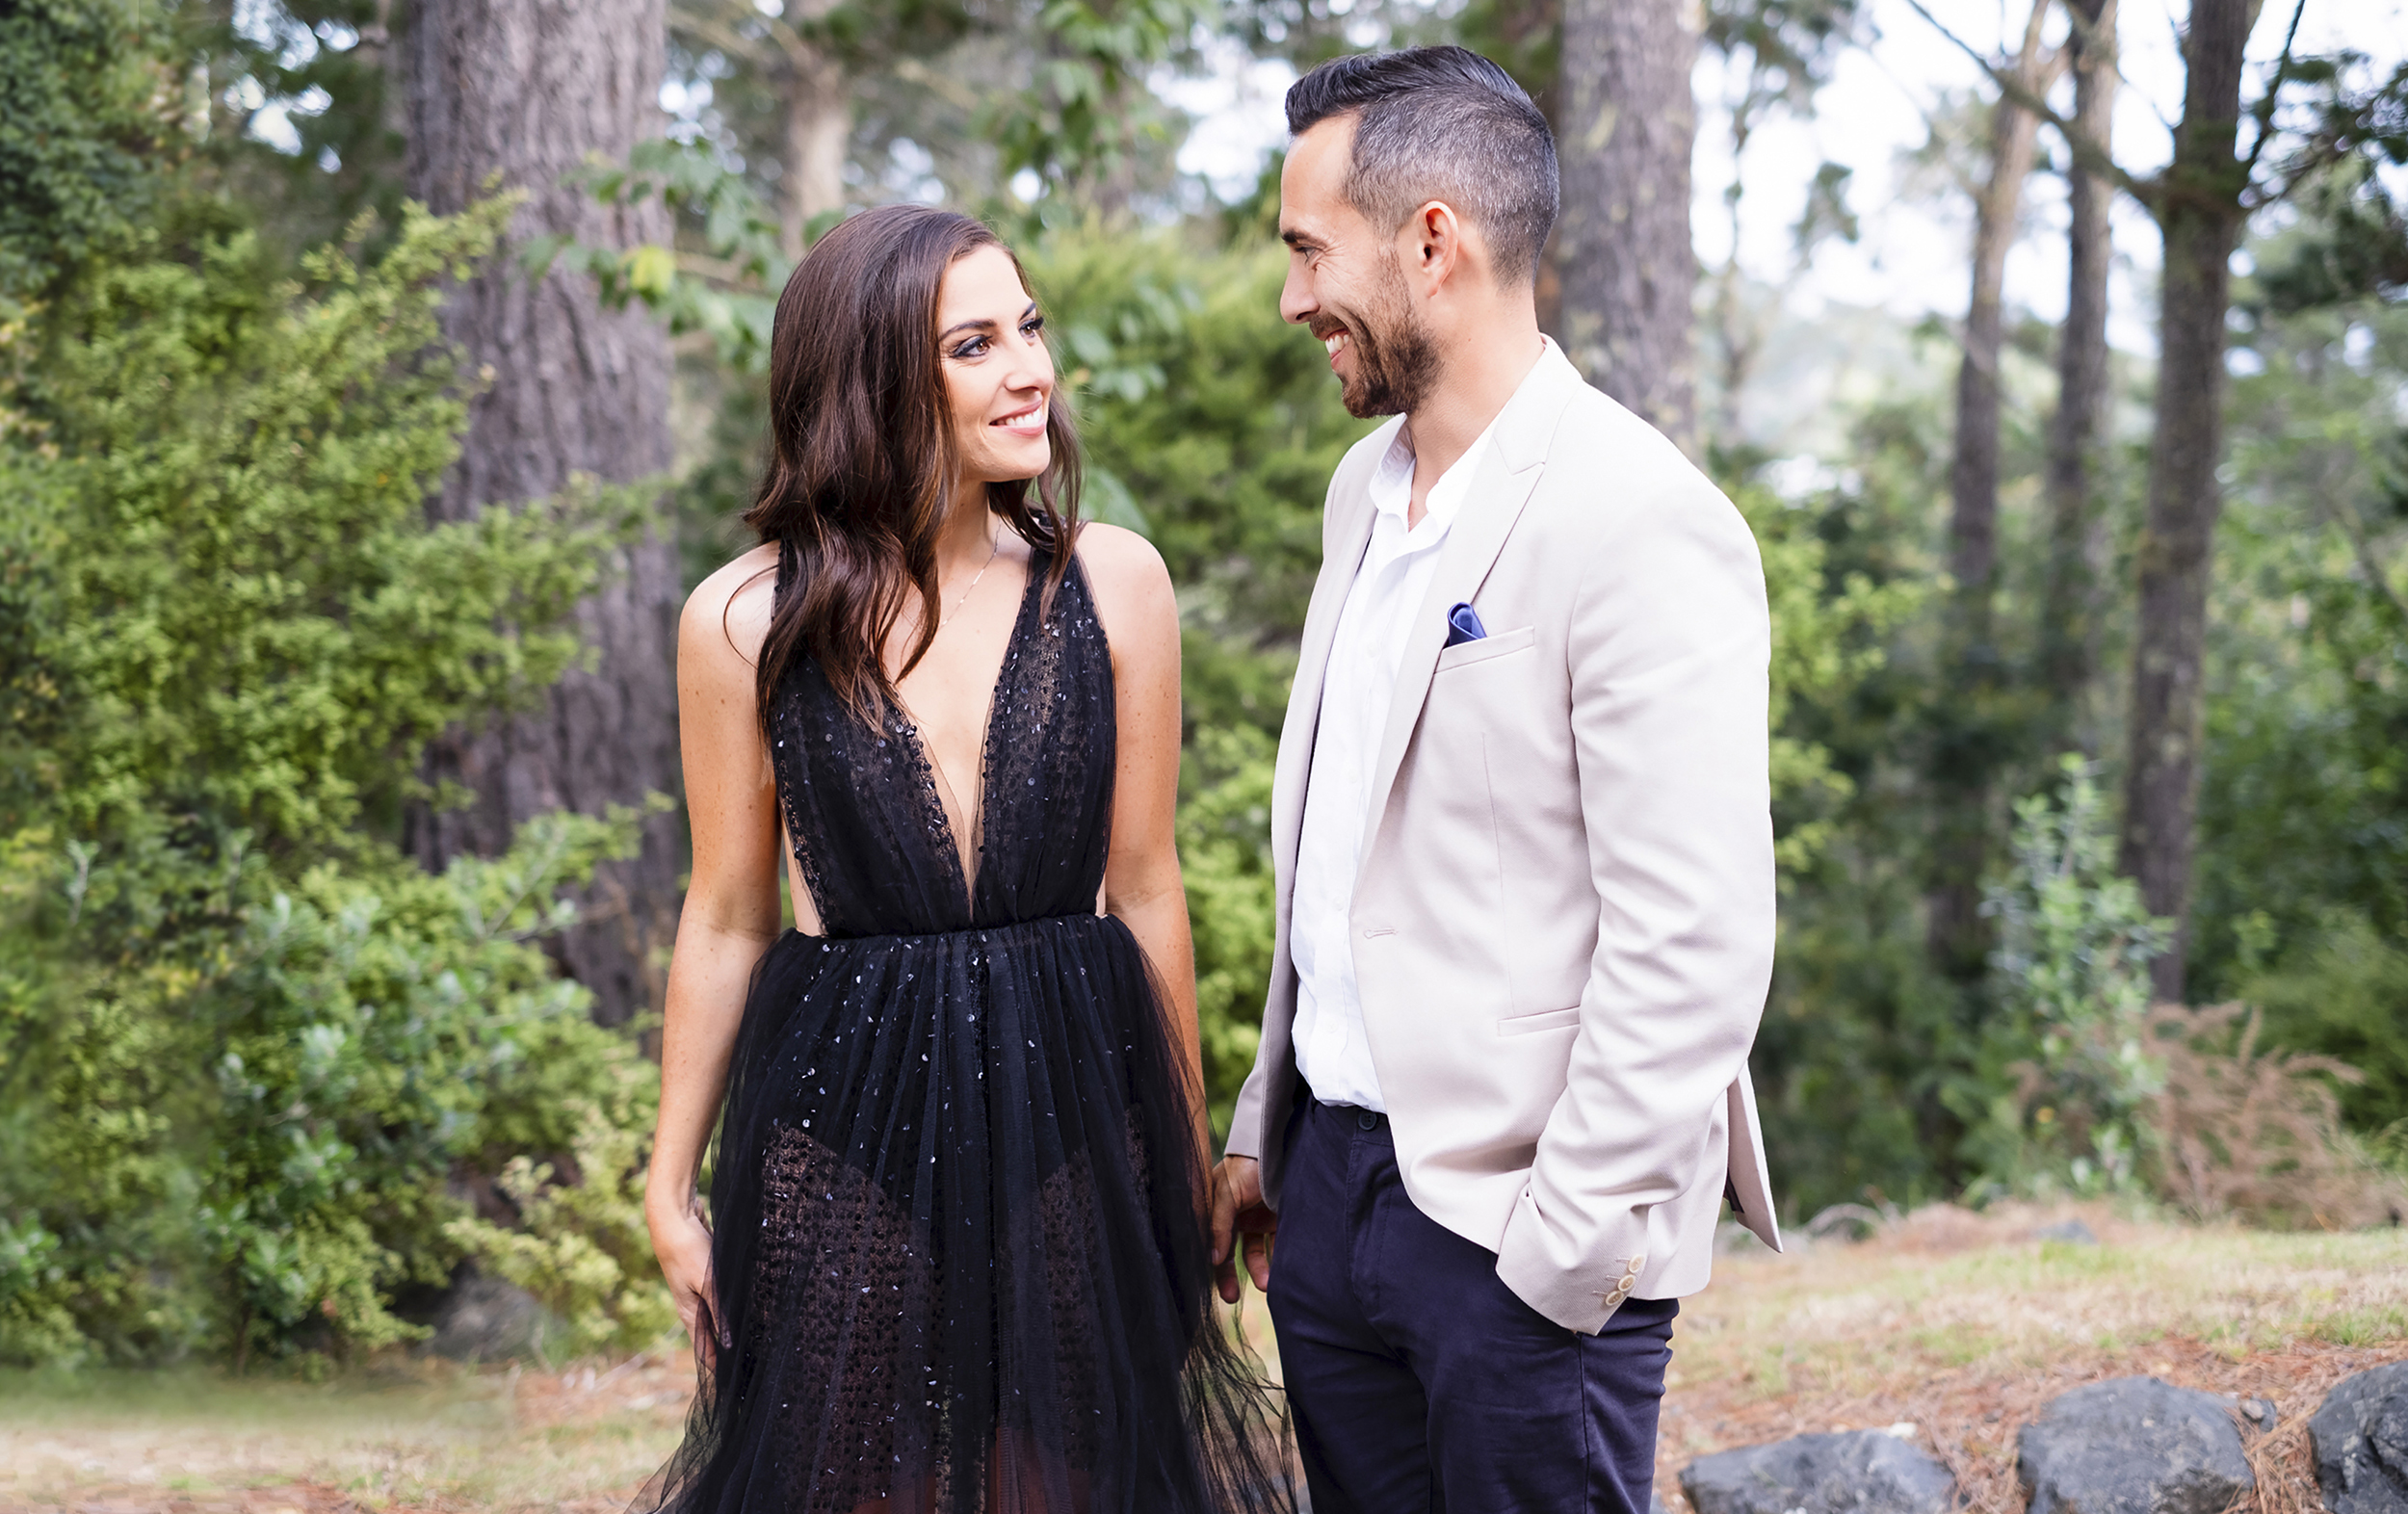 The Bachelorette NZ’s Lexie and Hamish are moving in together!